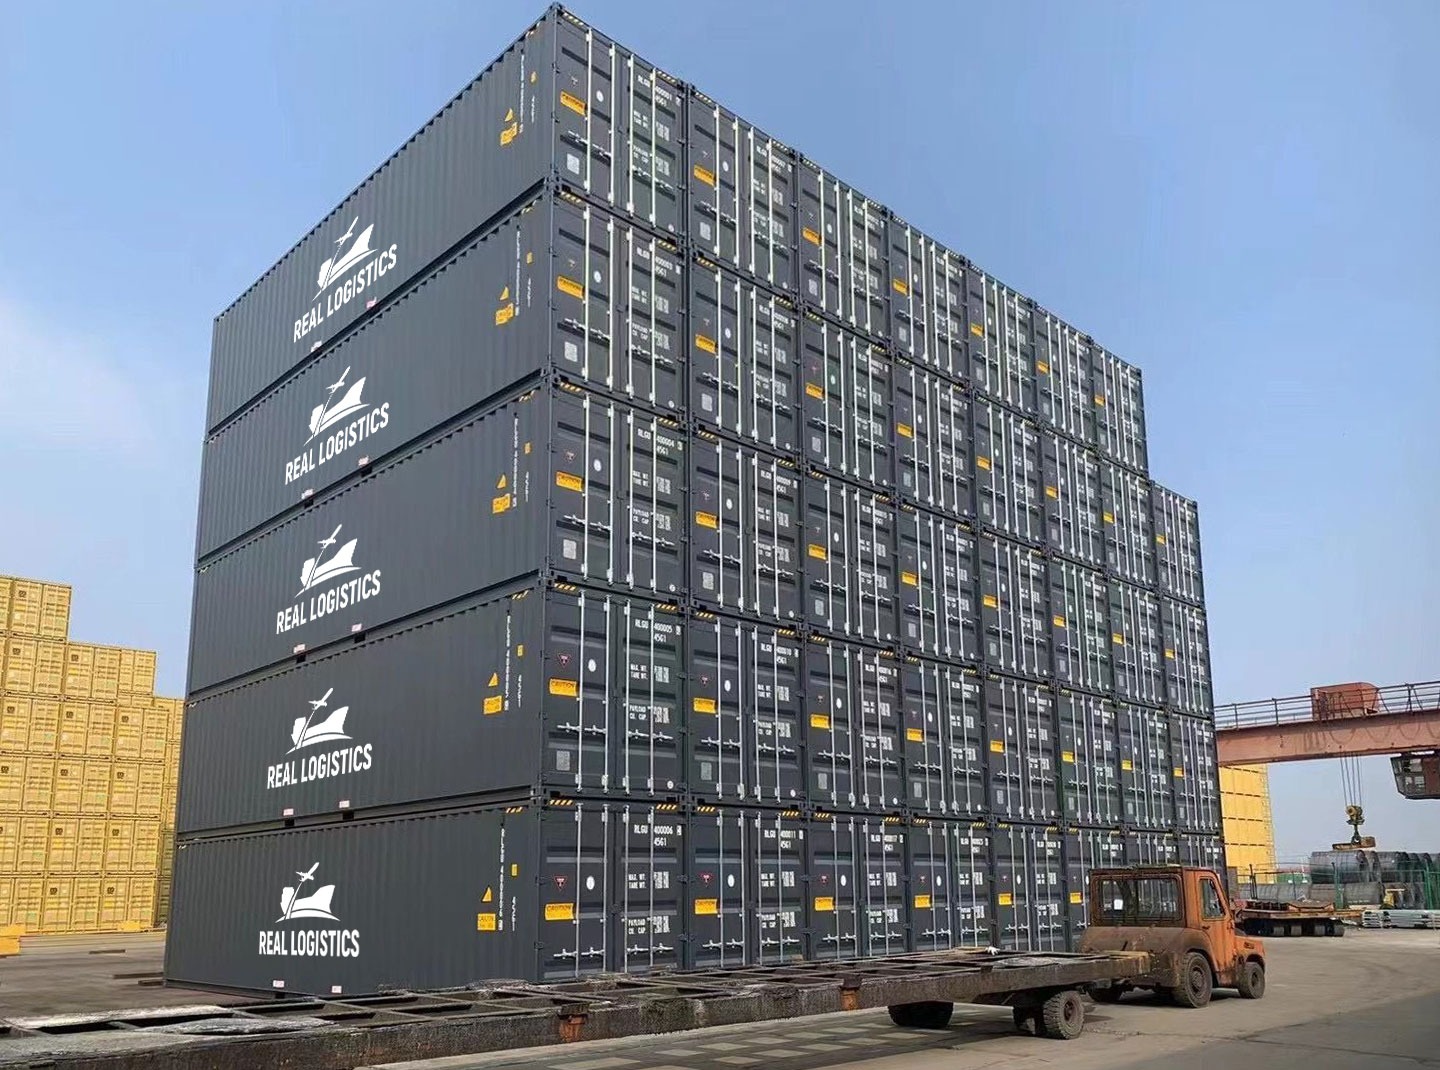 Real Logistics develops container rental, sale, and storage